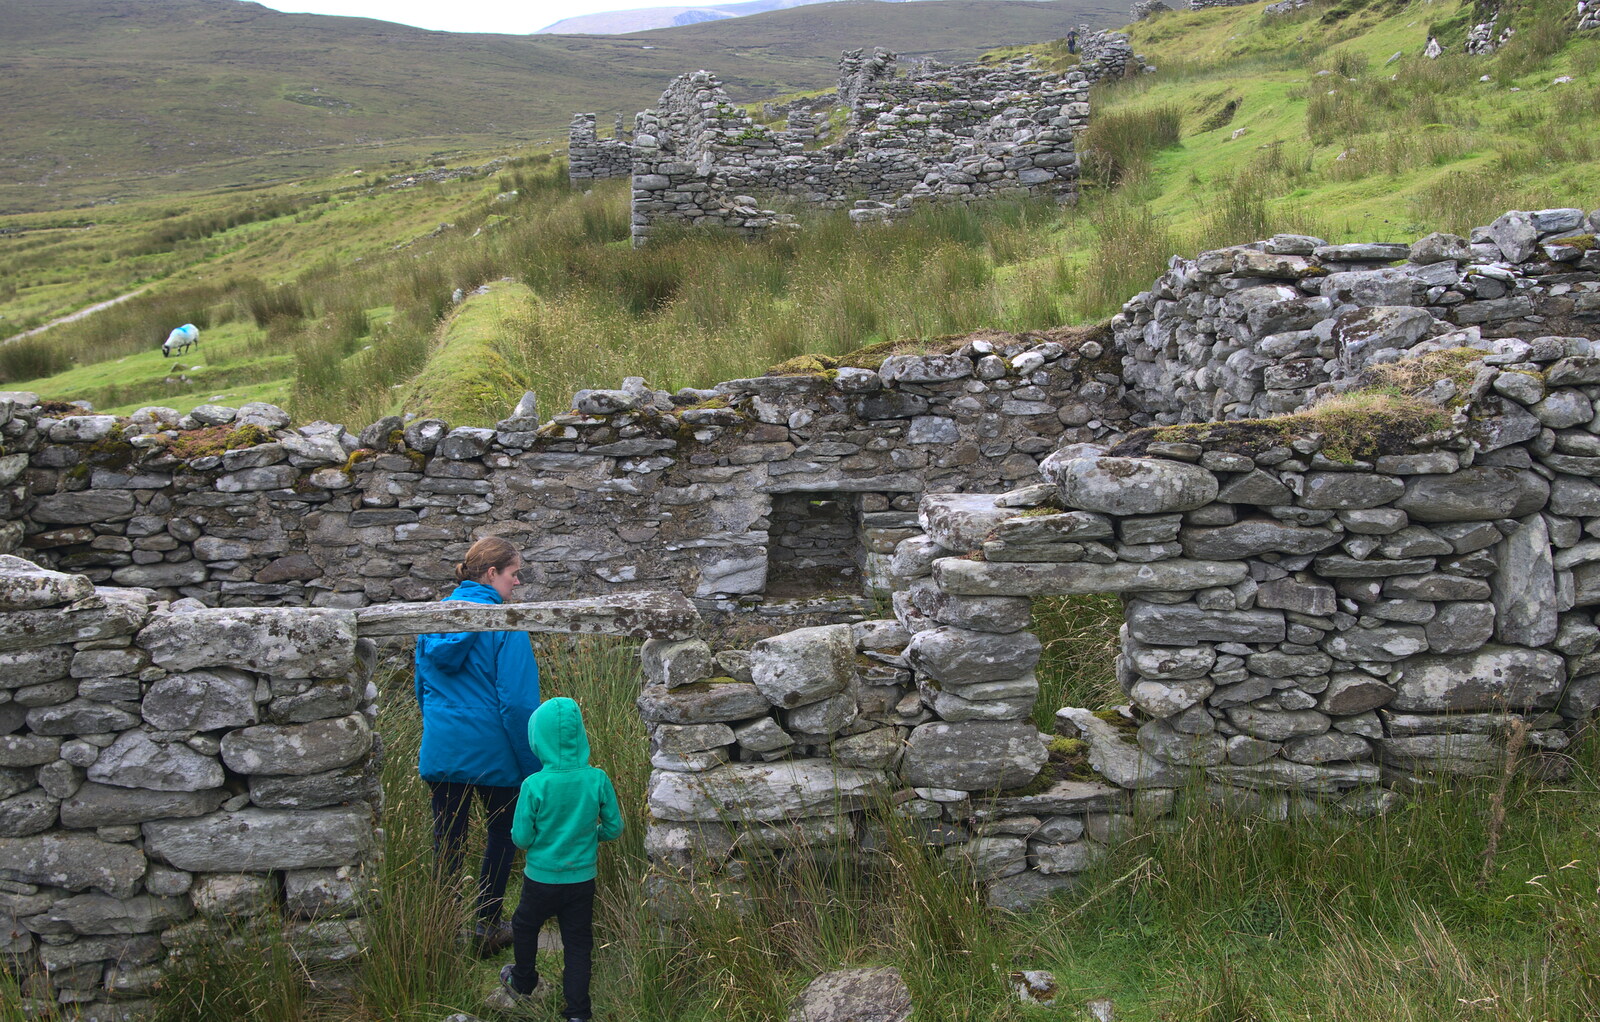 Exploring more ruins from Surfing Achill Island, Oileán Acla, Maigh Eo, Ireland - 8th August 2017